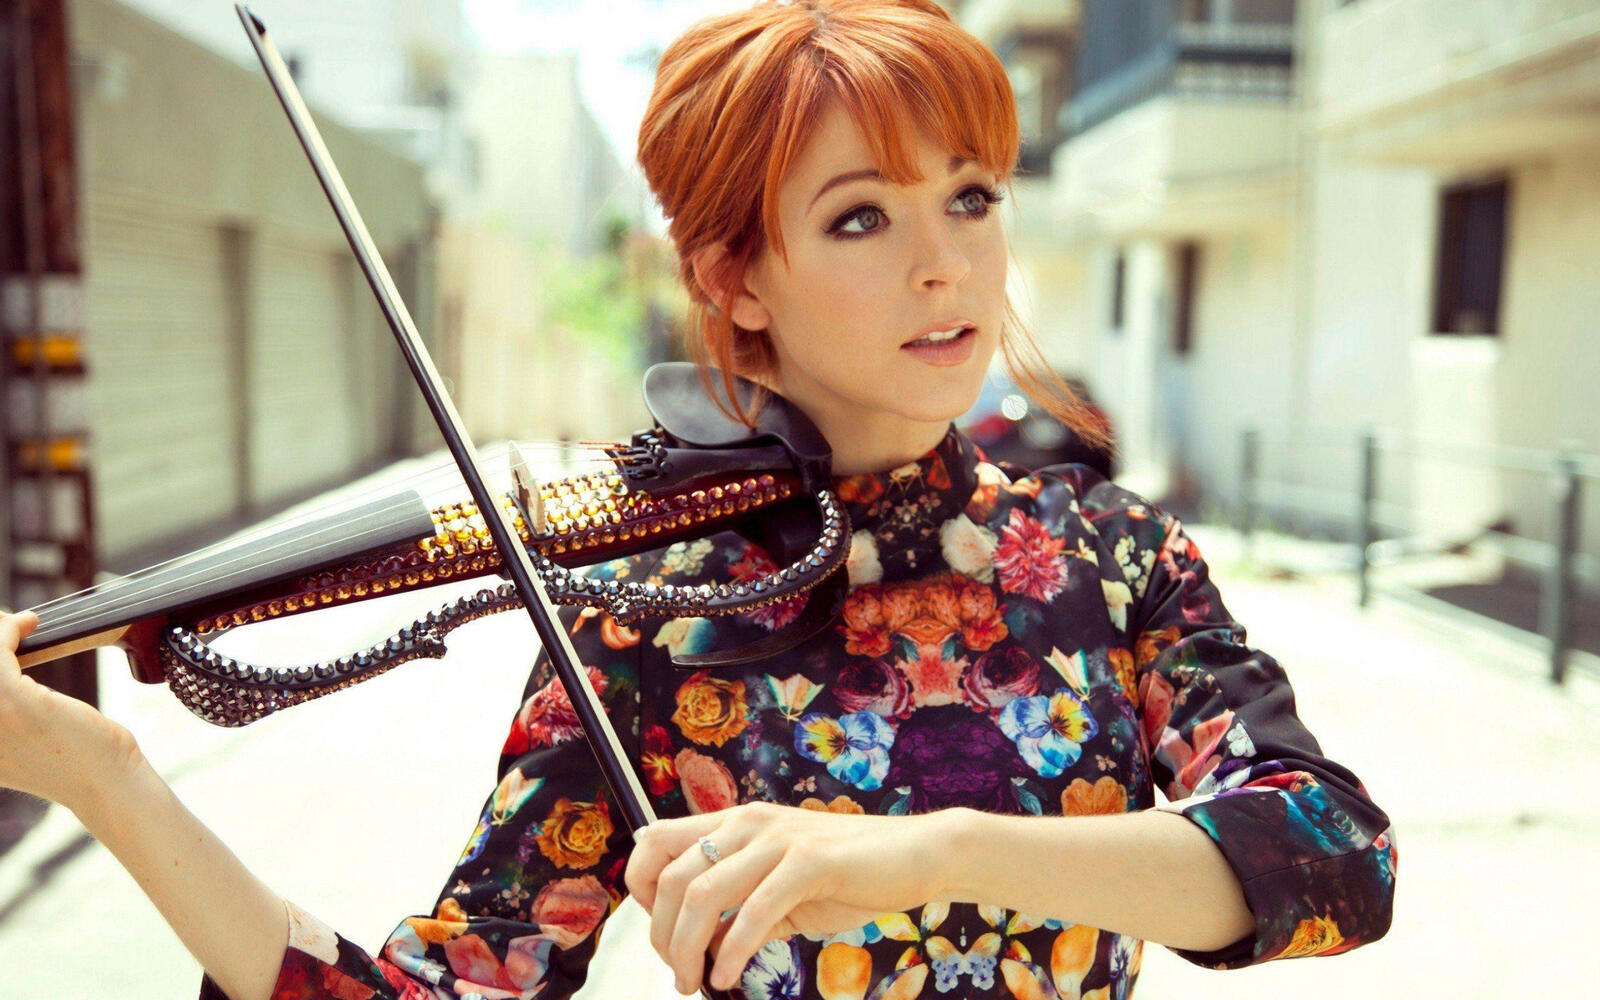 Wallpapers Lindsey Stirling girls musia on the desktop